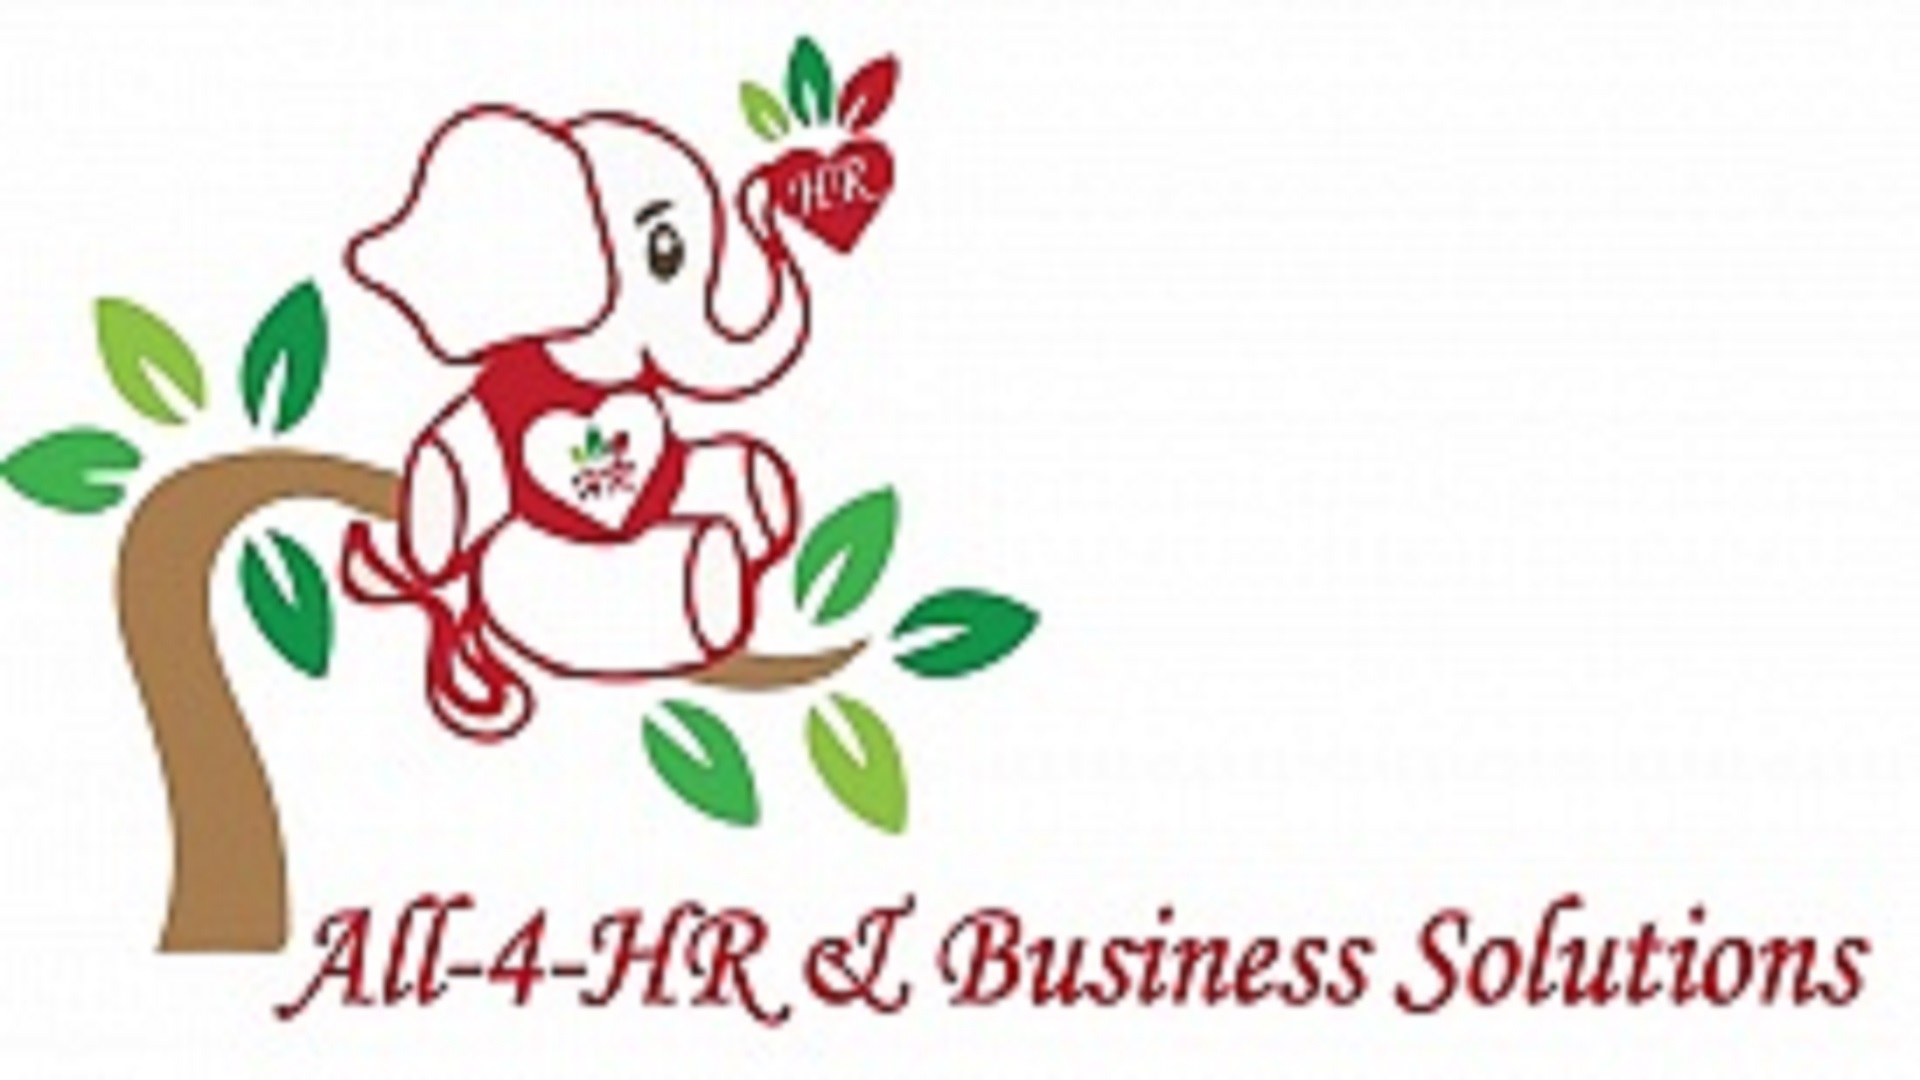 All-4-HR & Business Solutions